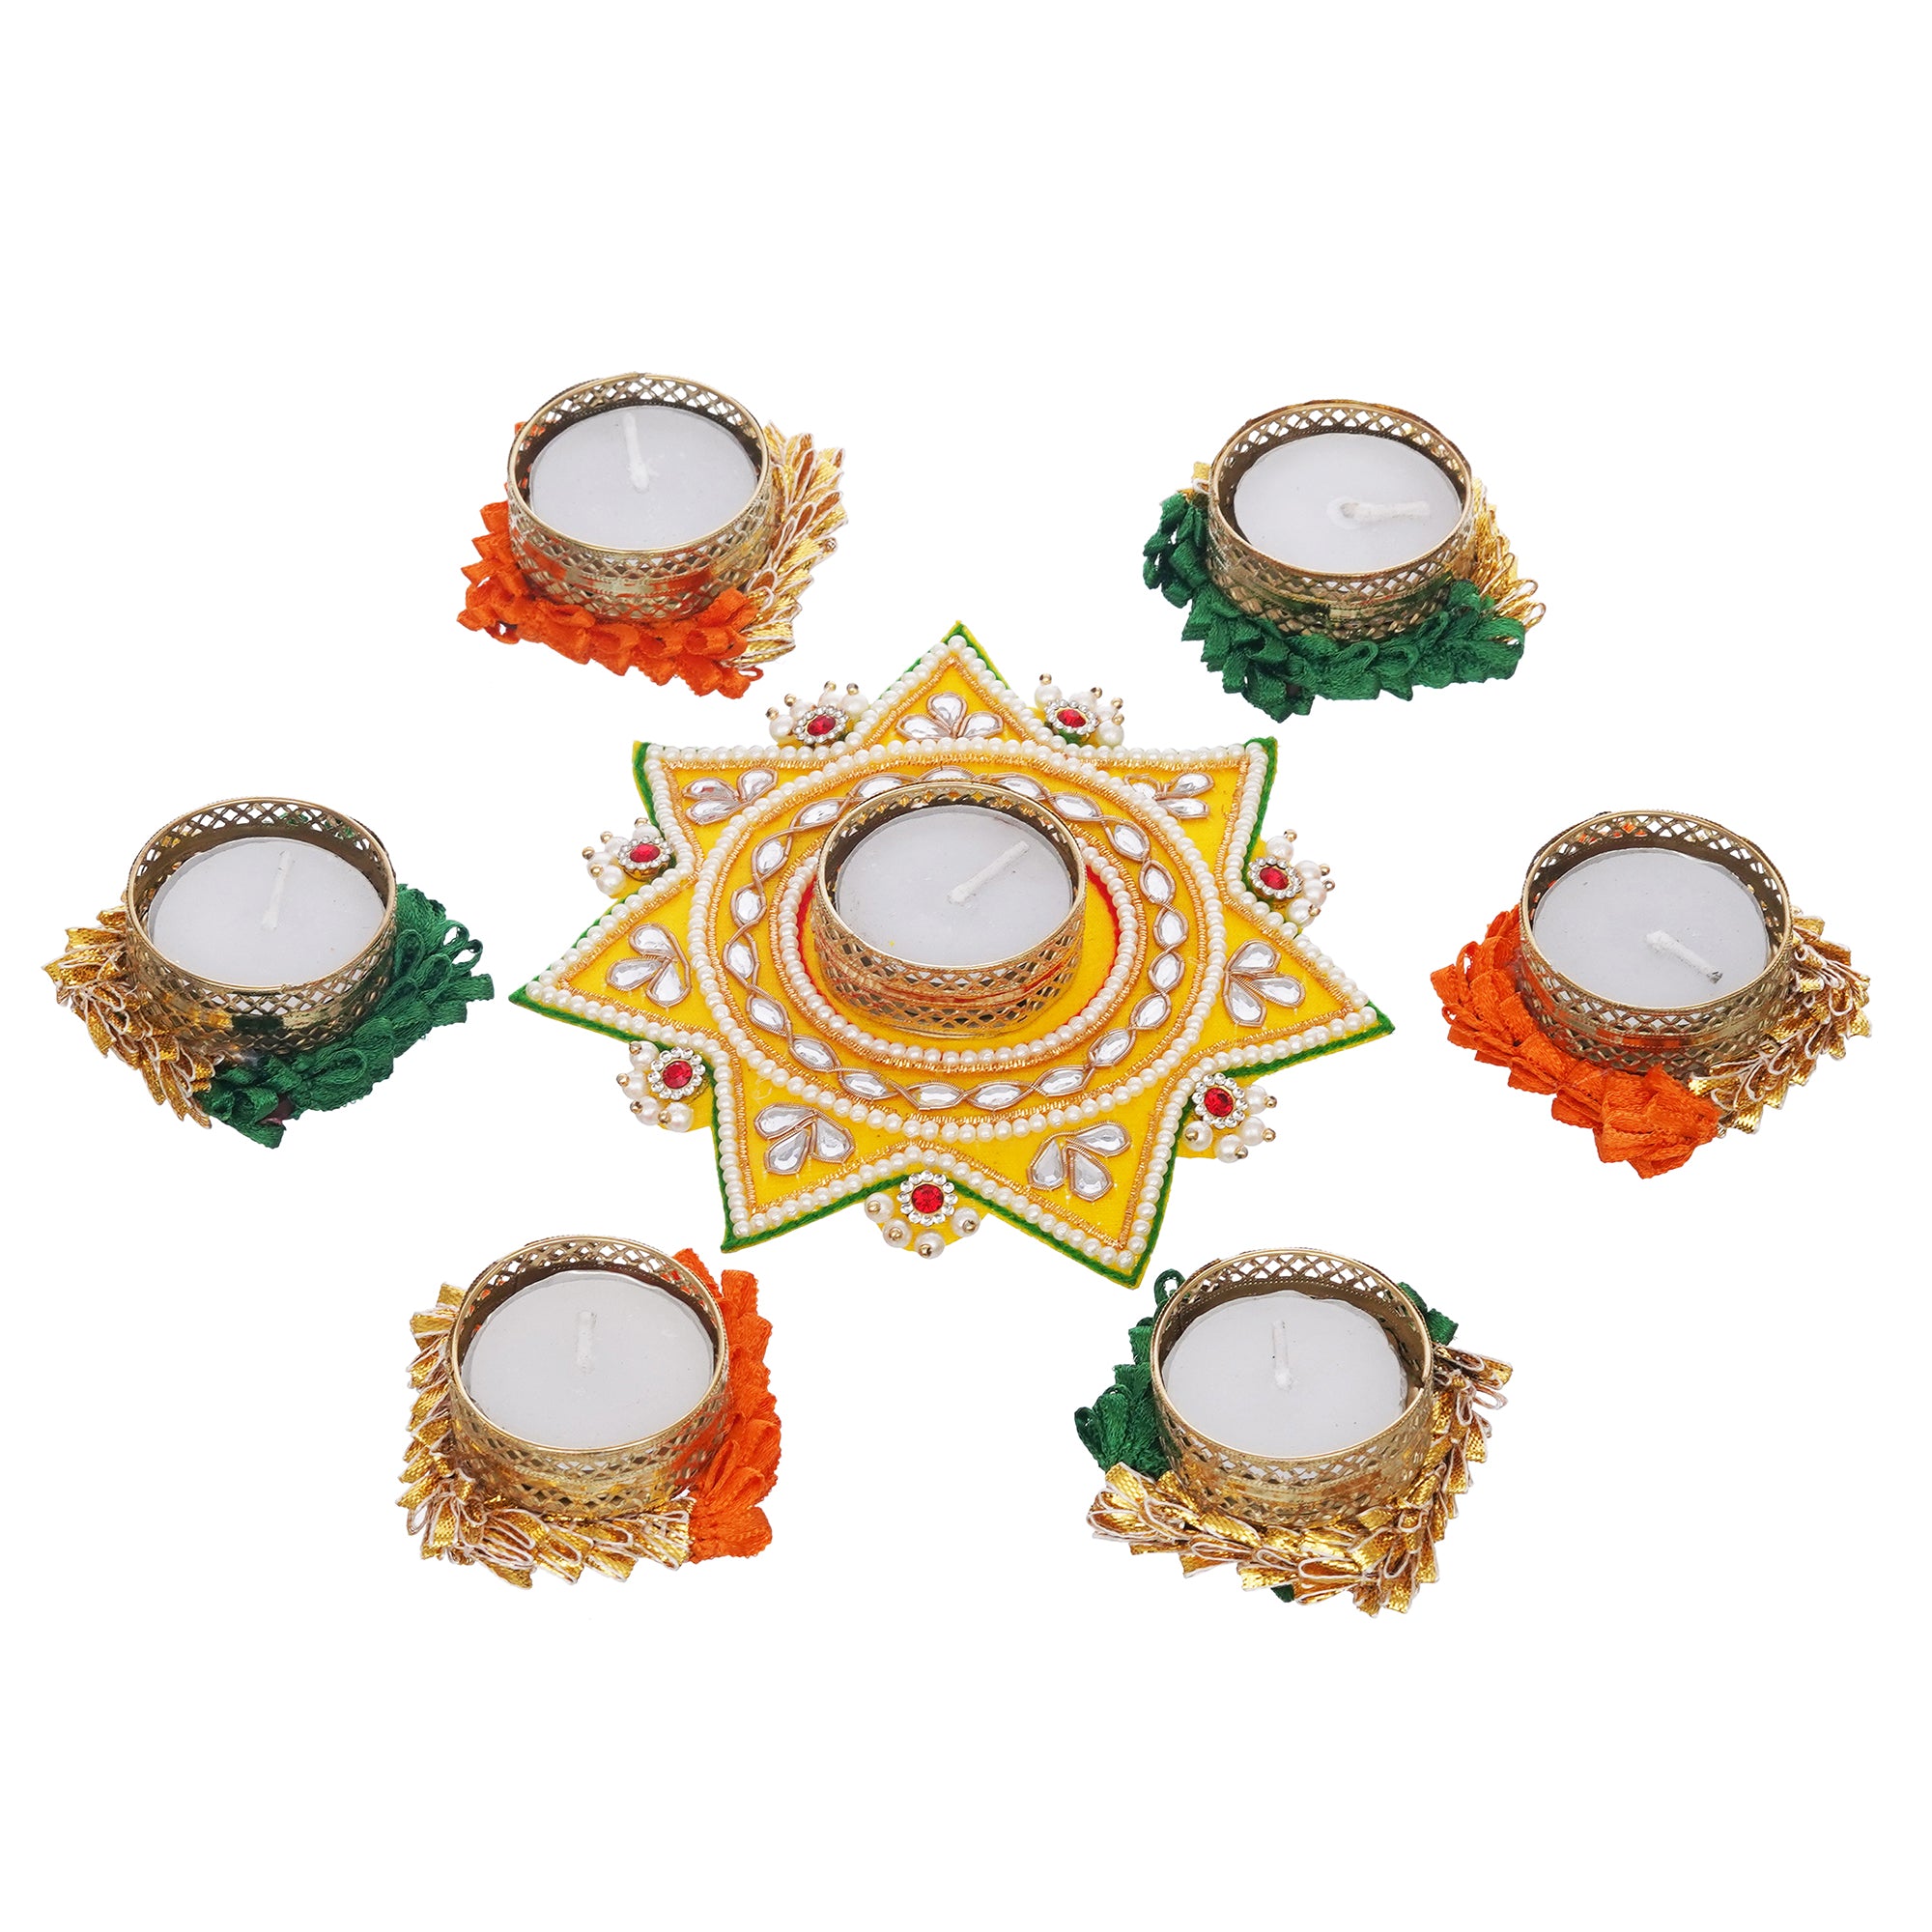 eCraftIndia Set of 7 Round and Star Shaped Diamond Beads and Pearls Decorative Tea Light Candle Holders 2